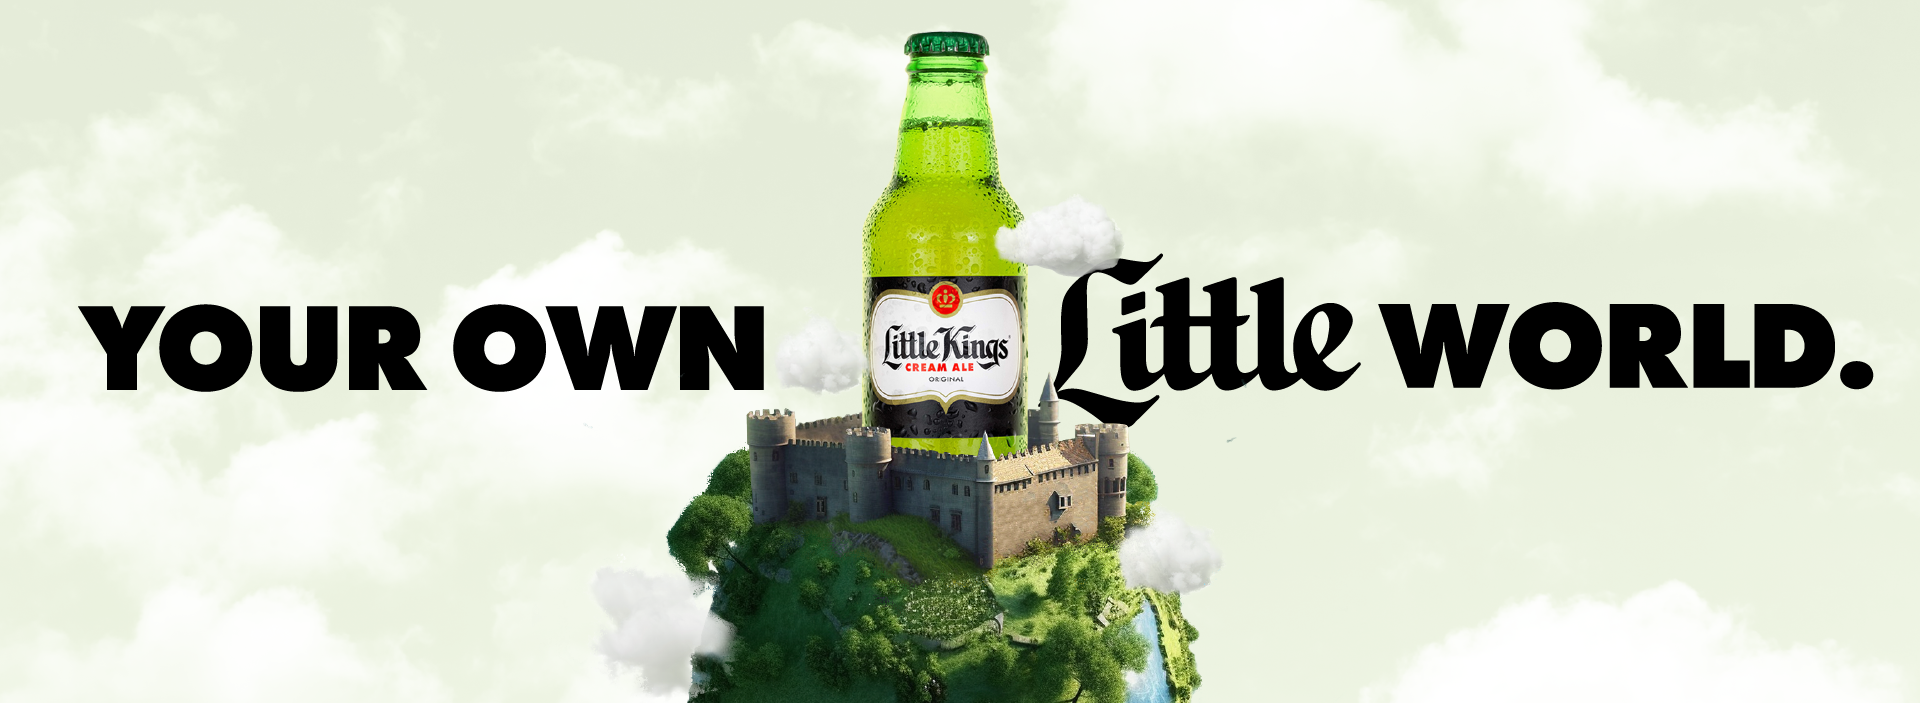 Text that reads "Your Own Little World." Underneath is a photo of a Little Kings bottle sitting on top of the world.